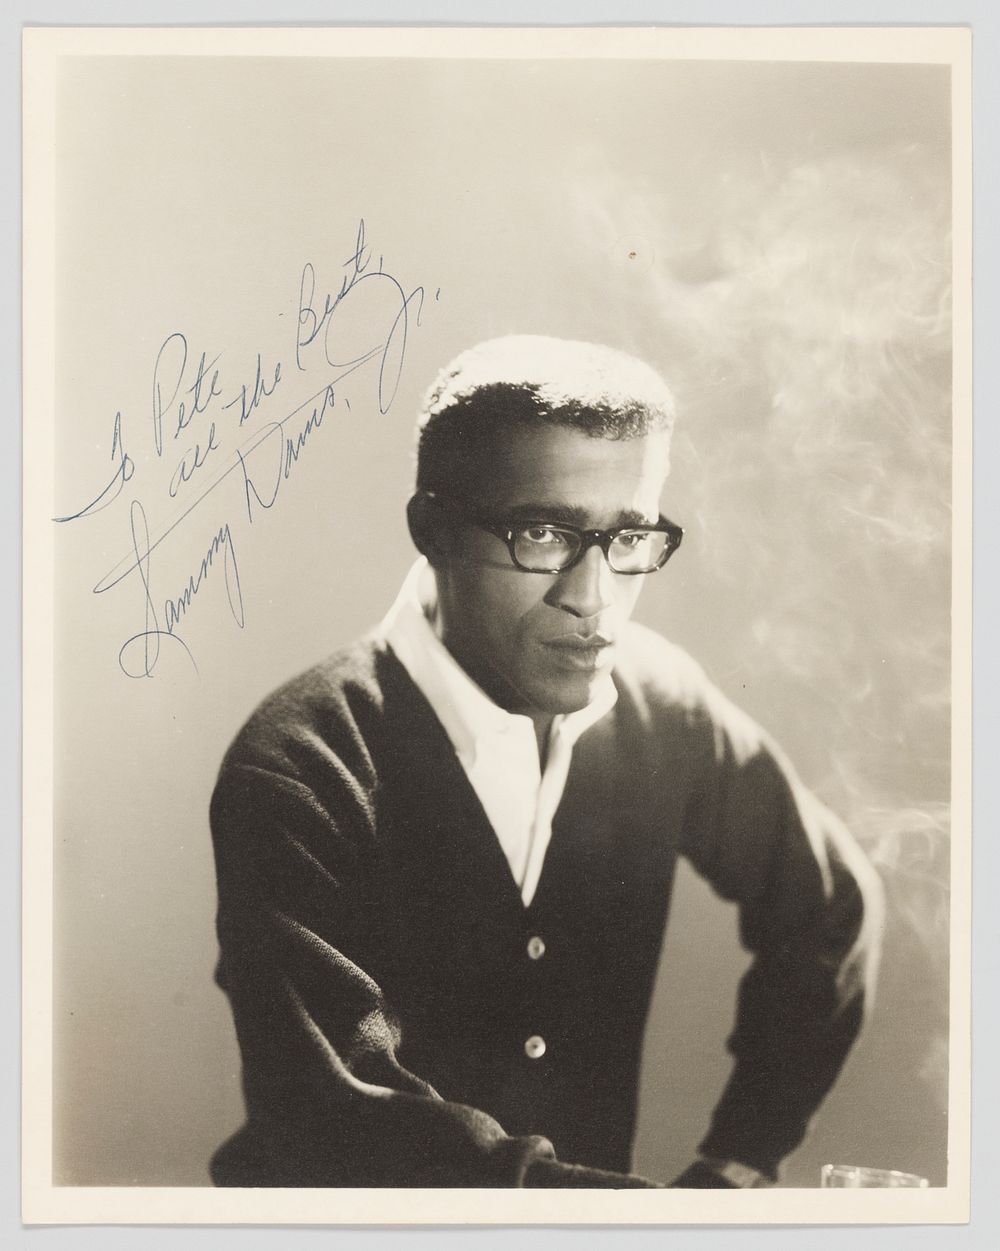 Photograph of Sammy Davis Jr., National Museum of African American History and Culture